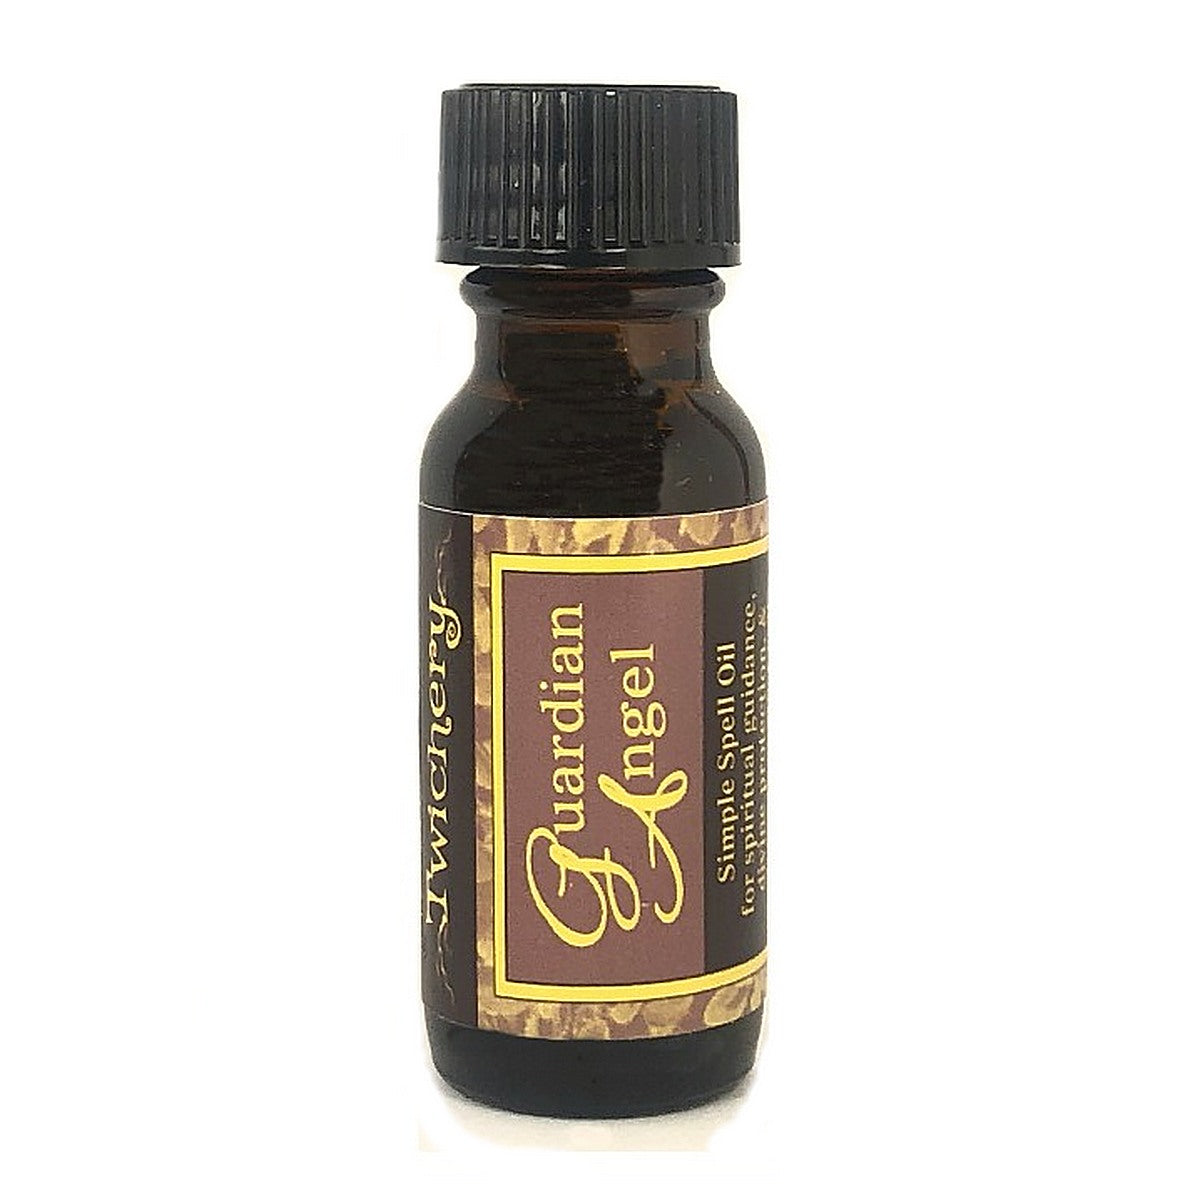 Twichery Guardian Angel Protection Quikspell Oil, One simple dab for protection! Hoodoo, Voodoo, Wicca, Pagan. Twichery is Witchcraft Made Simple.